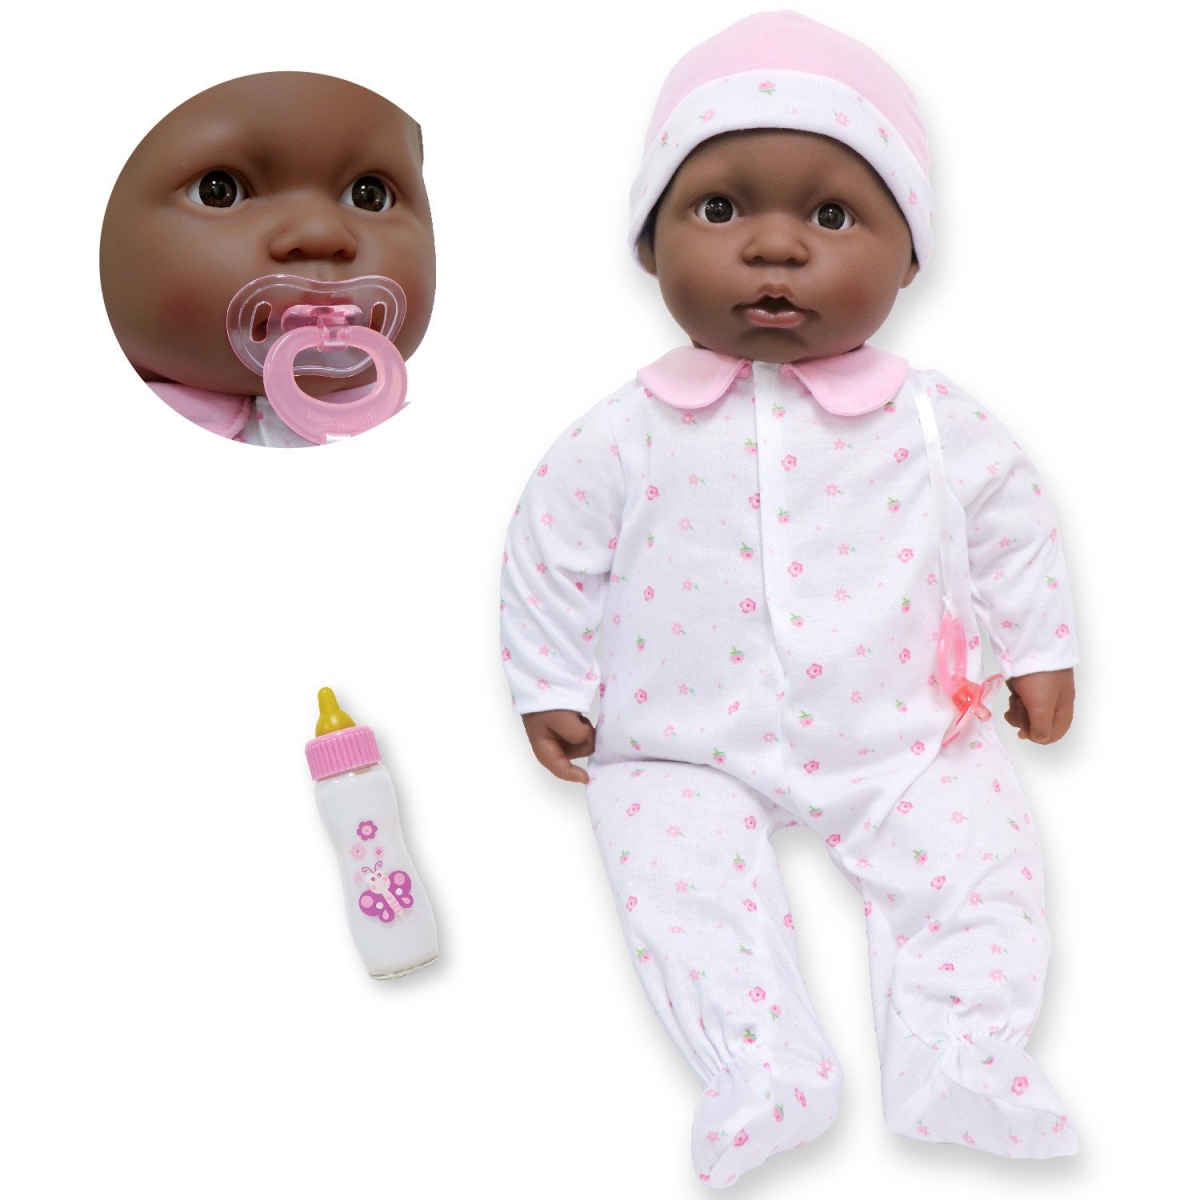 Picture of La Baby Play Doll - 20 in. African American Soft Body Baby Doll in Baby Outfit Pink with Pacifier